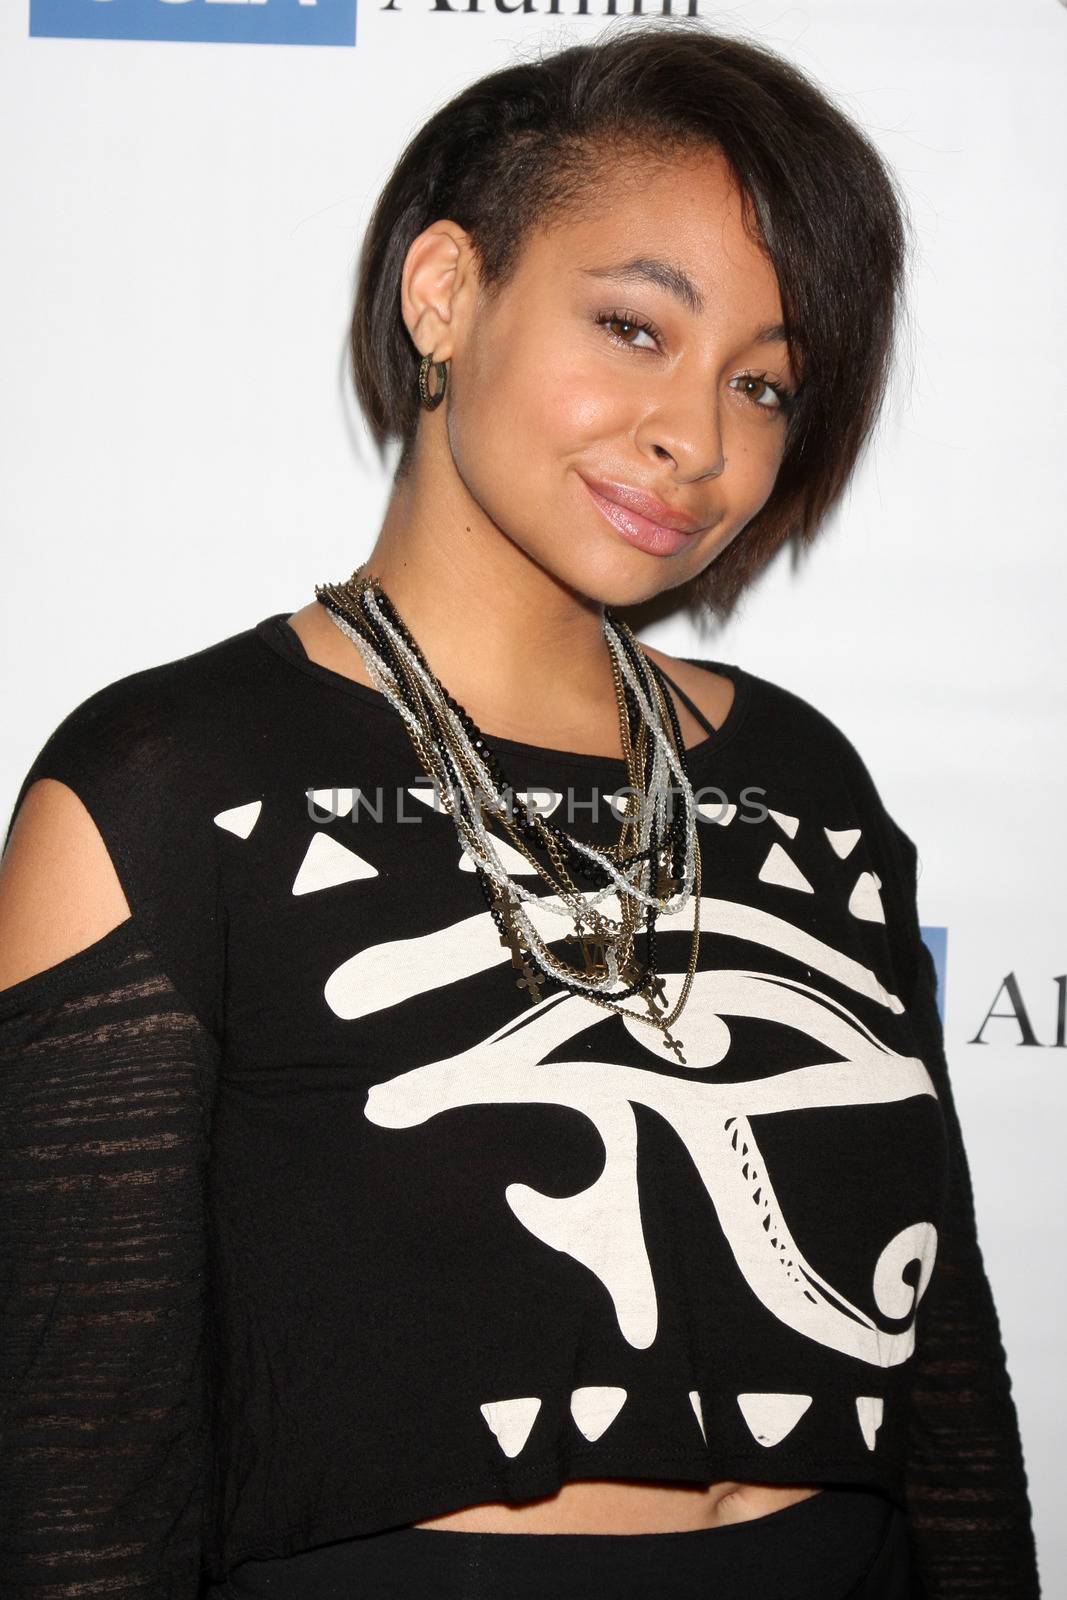 LOS ANGELES - MAY 16: Raven-Symone at the UCLA's Spring Sing 2014 at Pauley Pavilion UCLA on May 16, 2014 in Westwood, CA